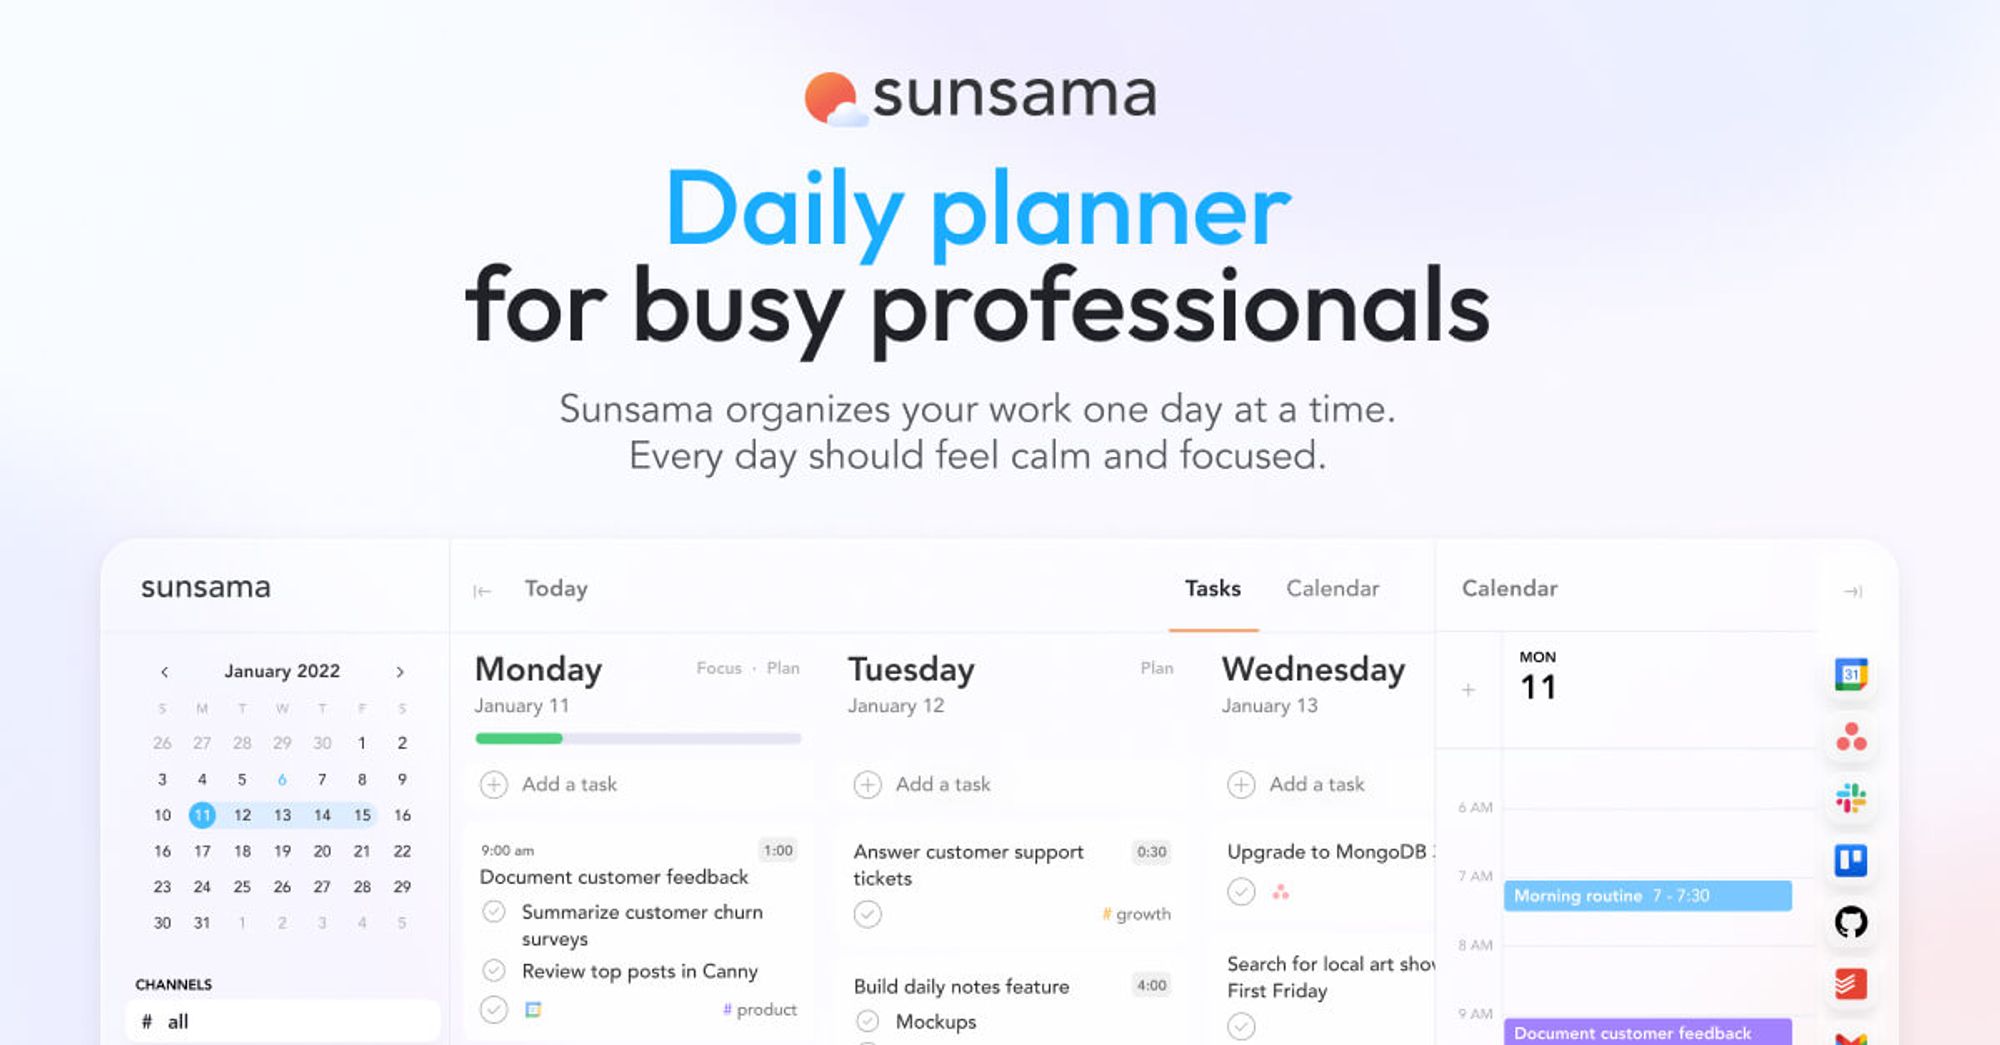 Sunsama - The daily planner for busy professionals